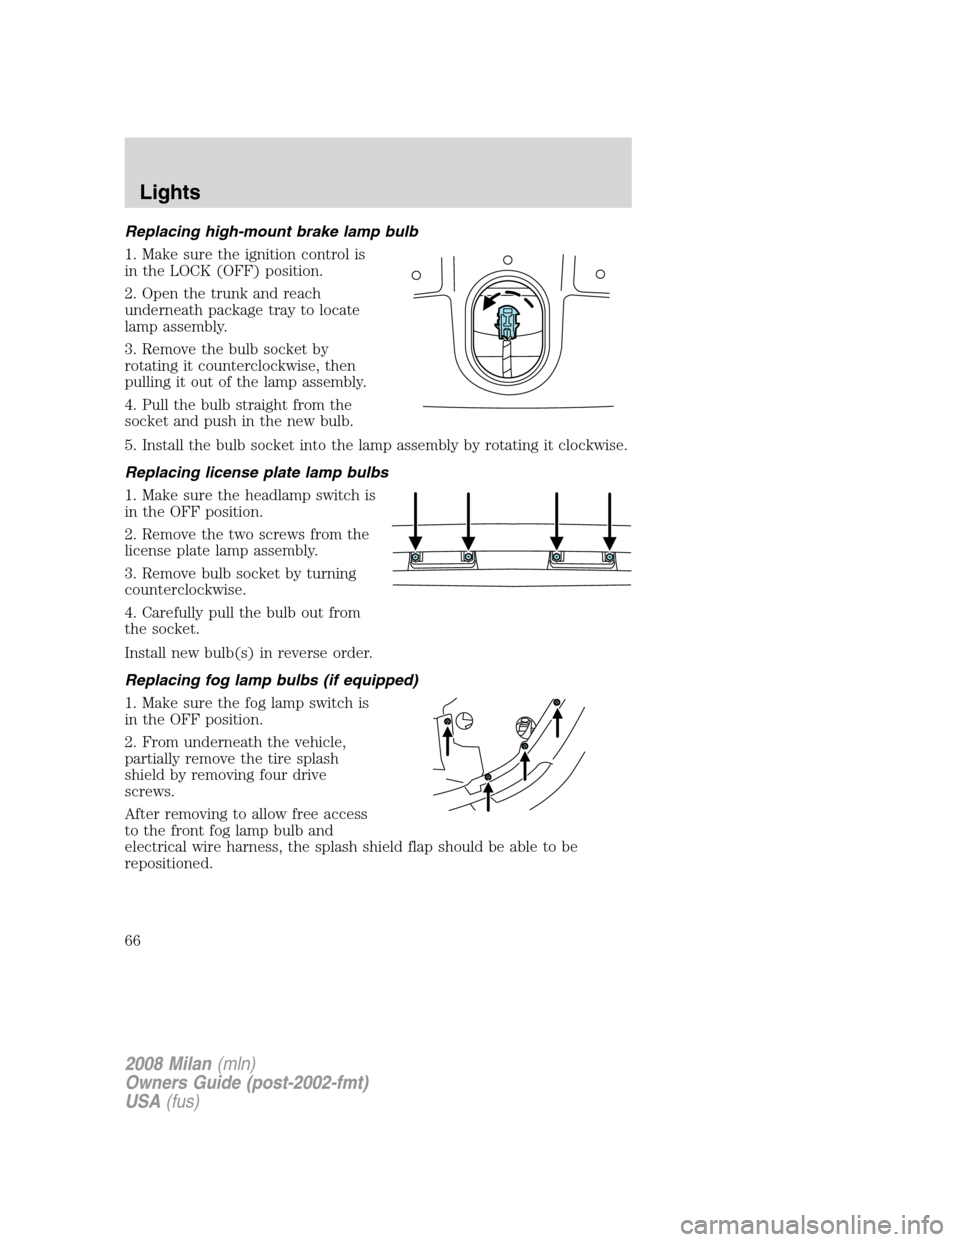 Mercury Milan 2008  Owners Manuals Replacing high-mount brake lamp bulb
1. Make sure the ignition control is
in the LOCK (OFF) position.
2. Open the trunk and reach
underneath package tray to locate
lamp assembly.
3. Remove the bulb so